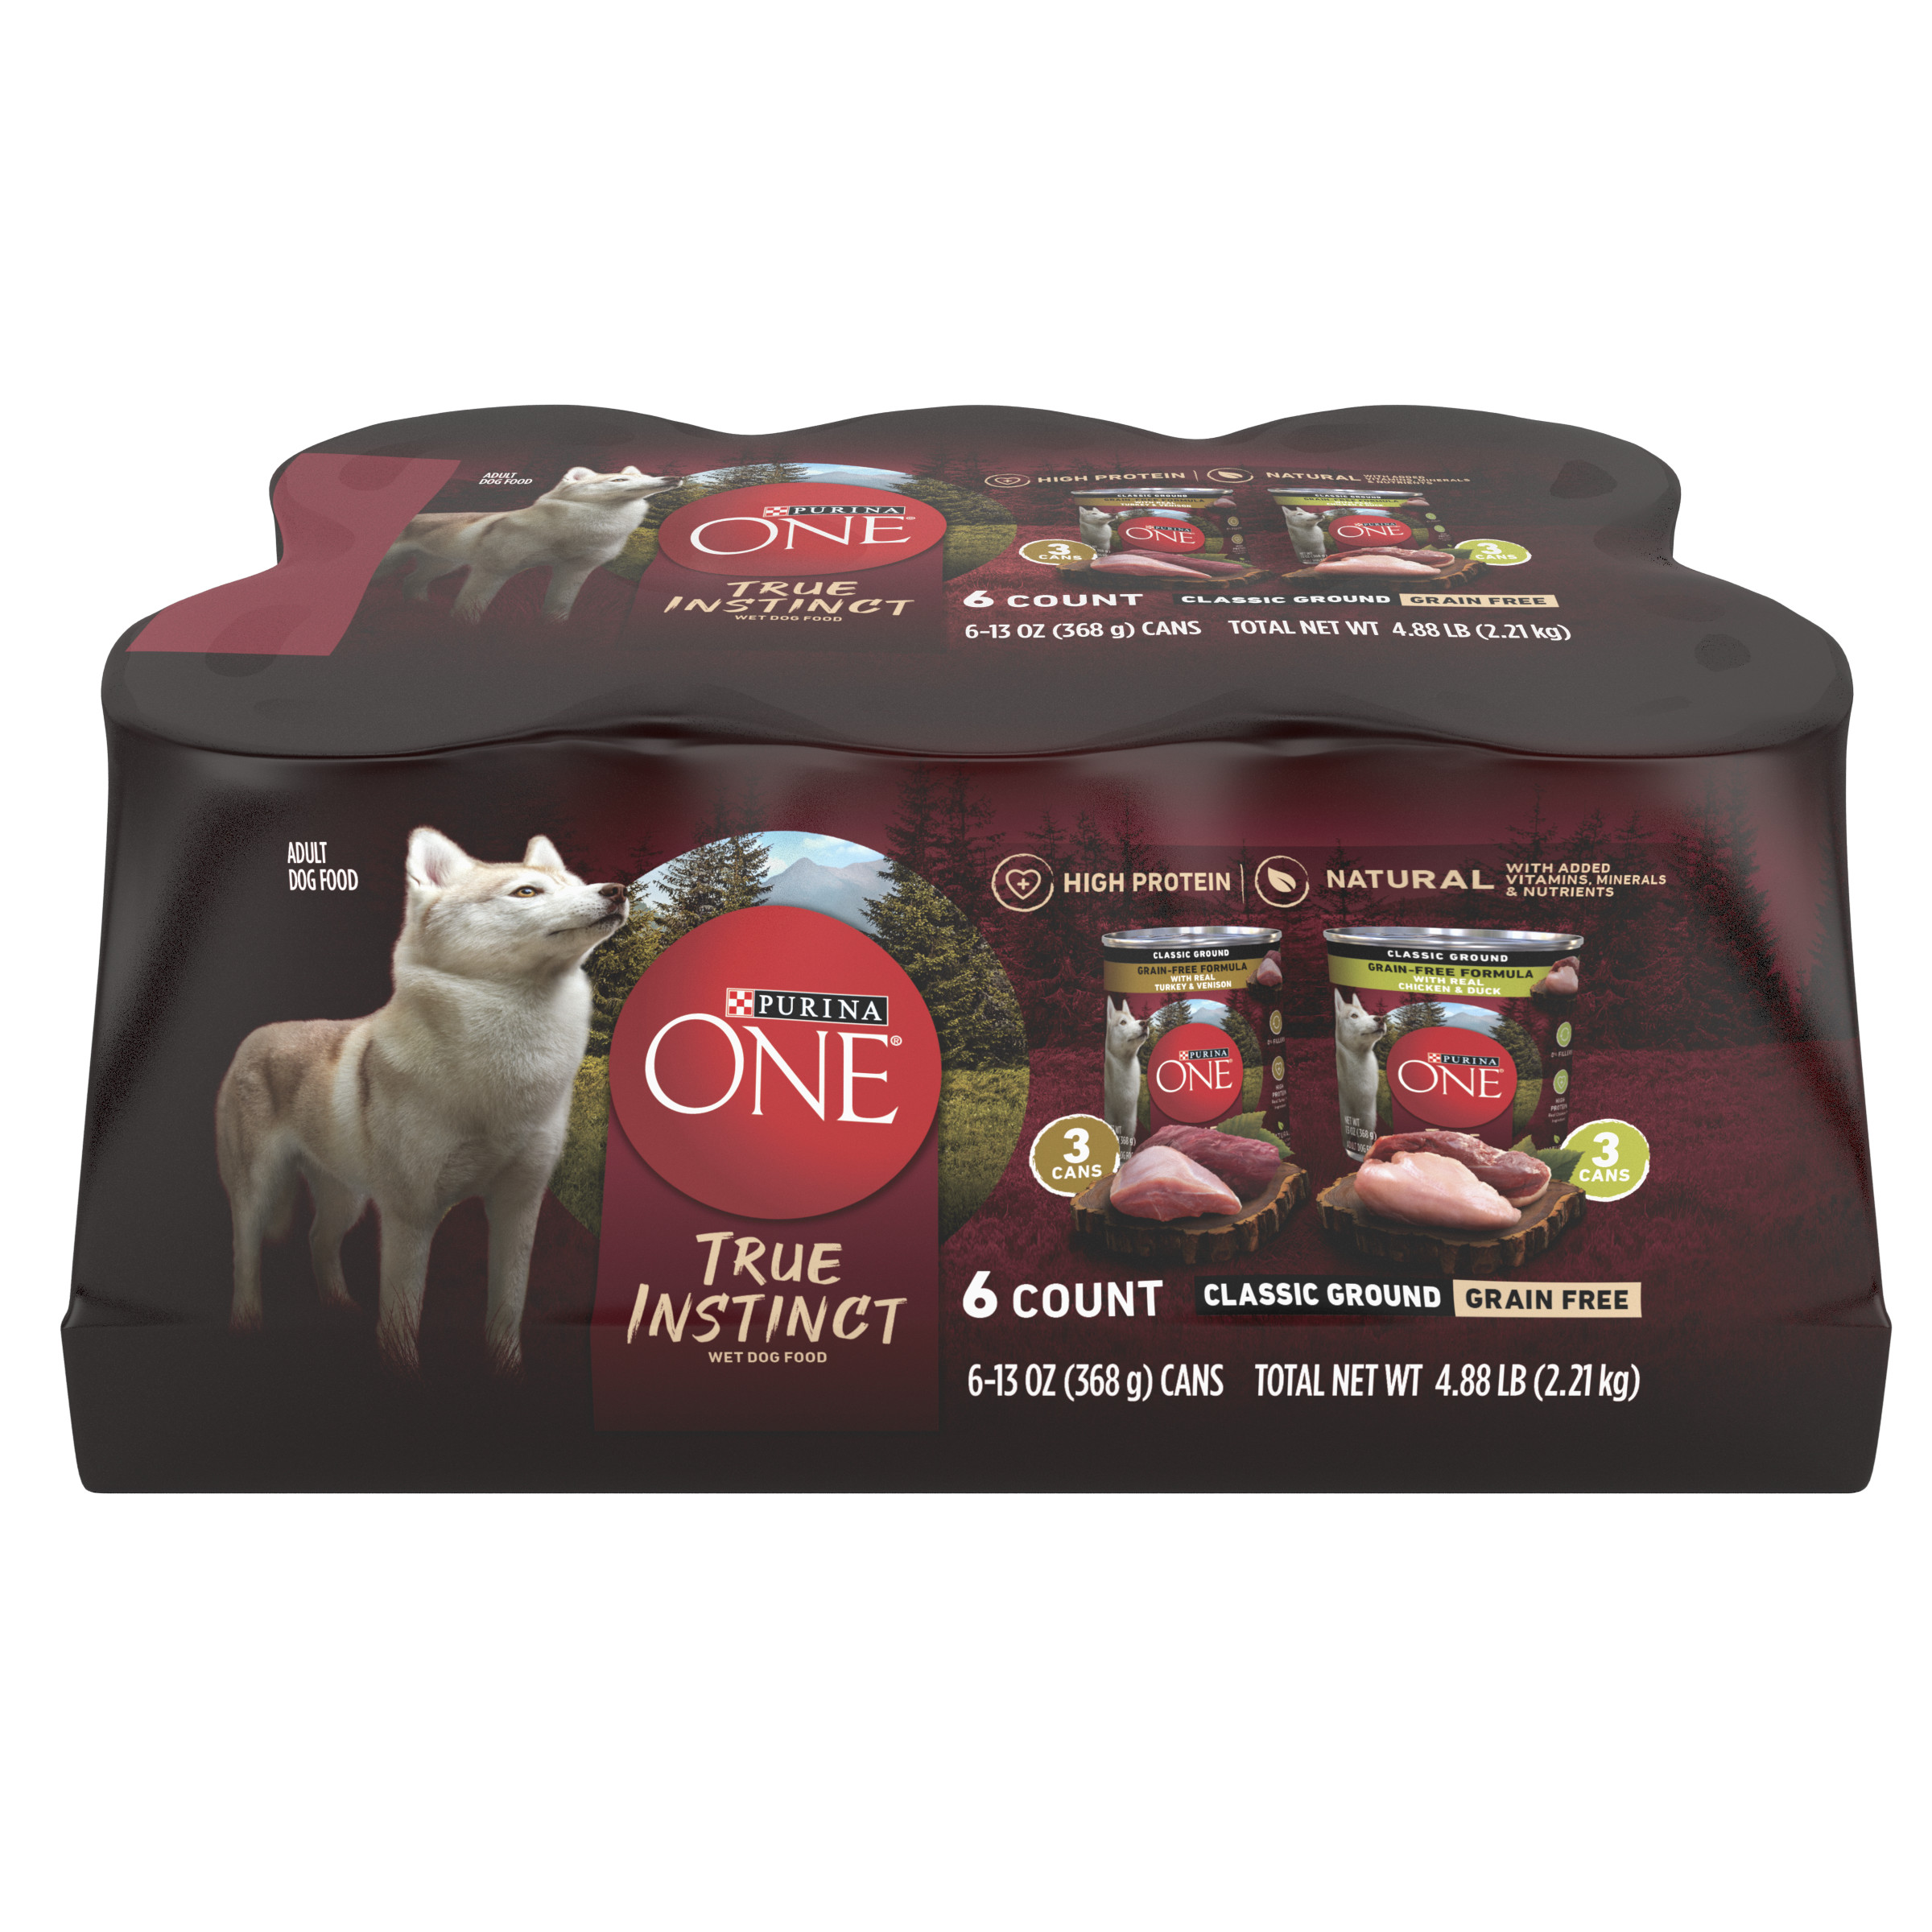 Purina ONE True Instinct Classic Soft Ground Grain Free Flavors Adult Wet Dog Food Variety Pack, 13 oz cans (6 pack) - image 1 of 12